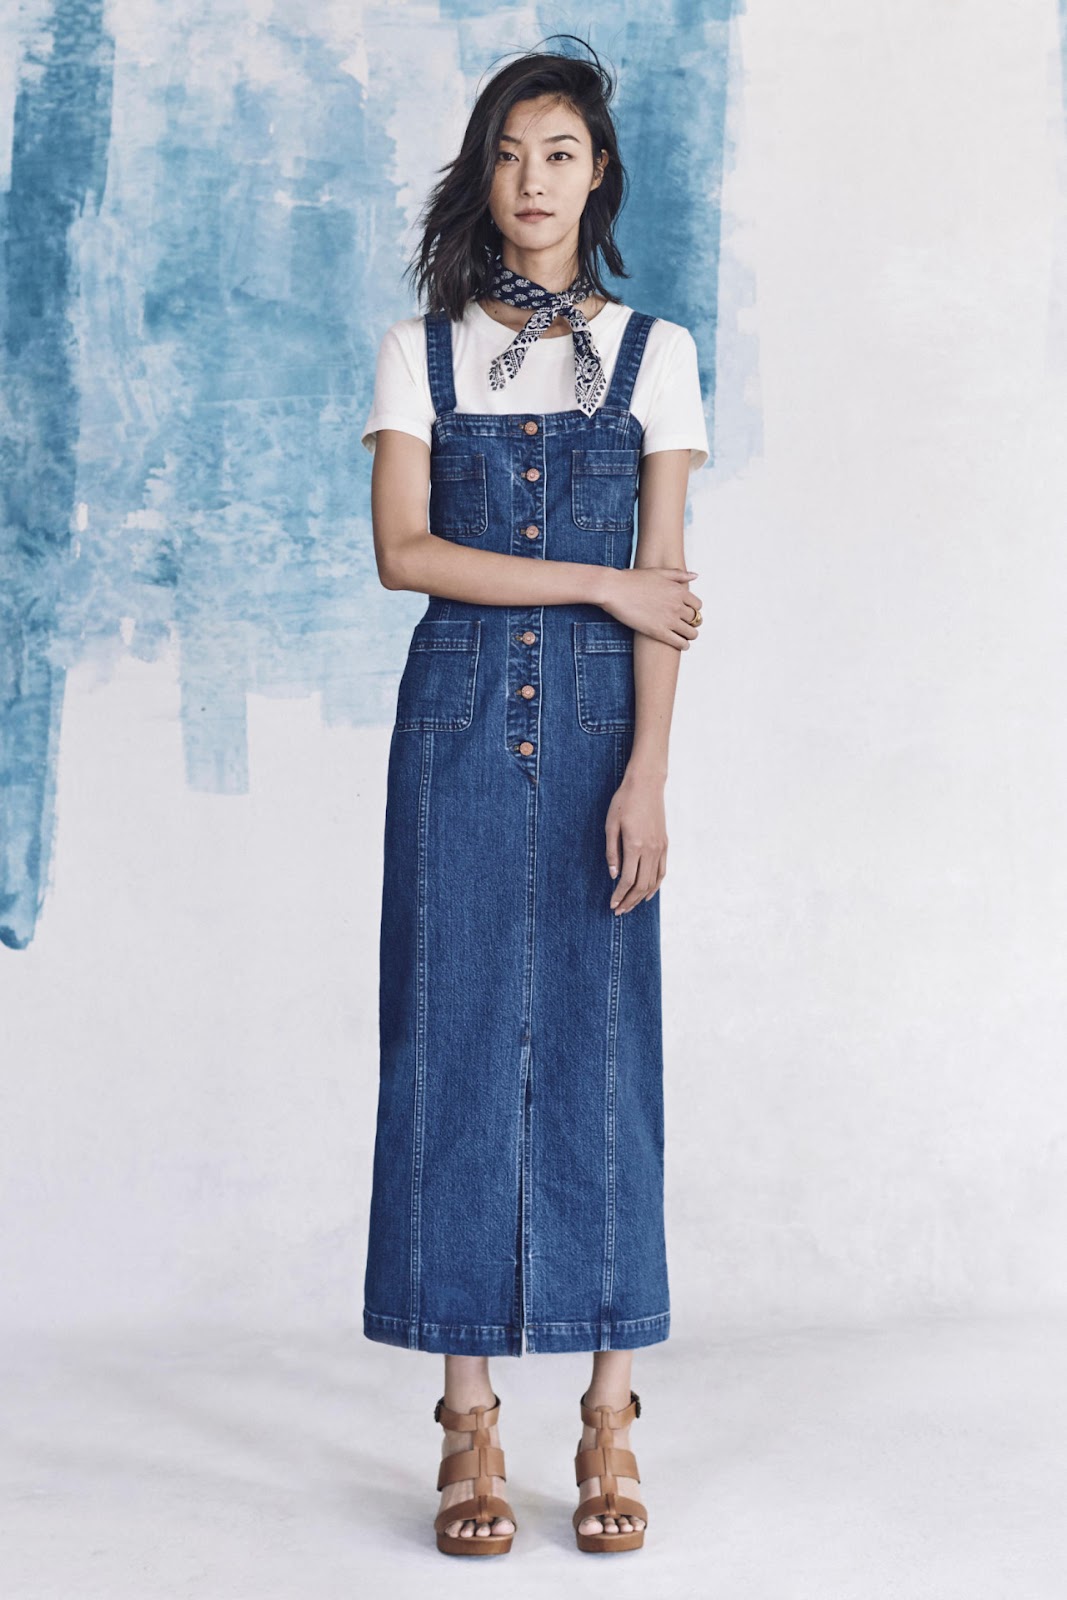 Park Ji Hye for Madewell Spring 2016 collection | Daily Korean ...